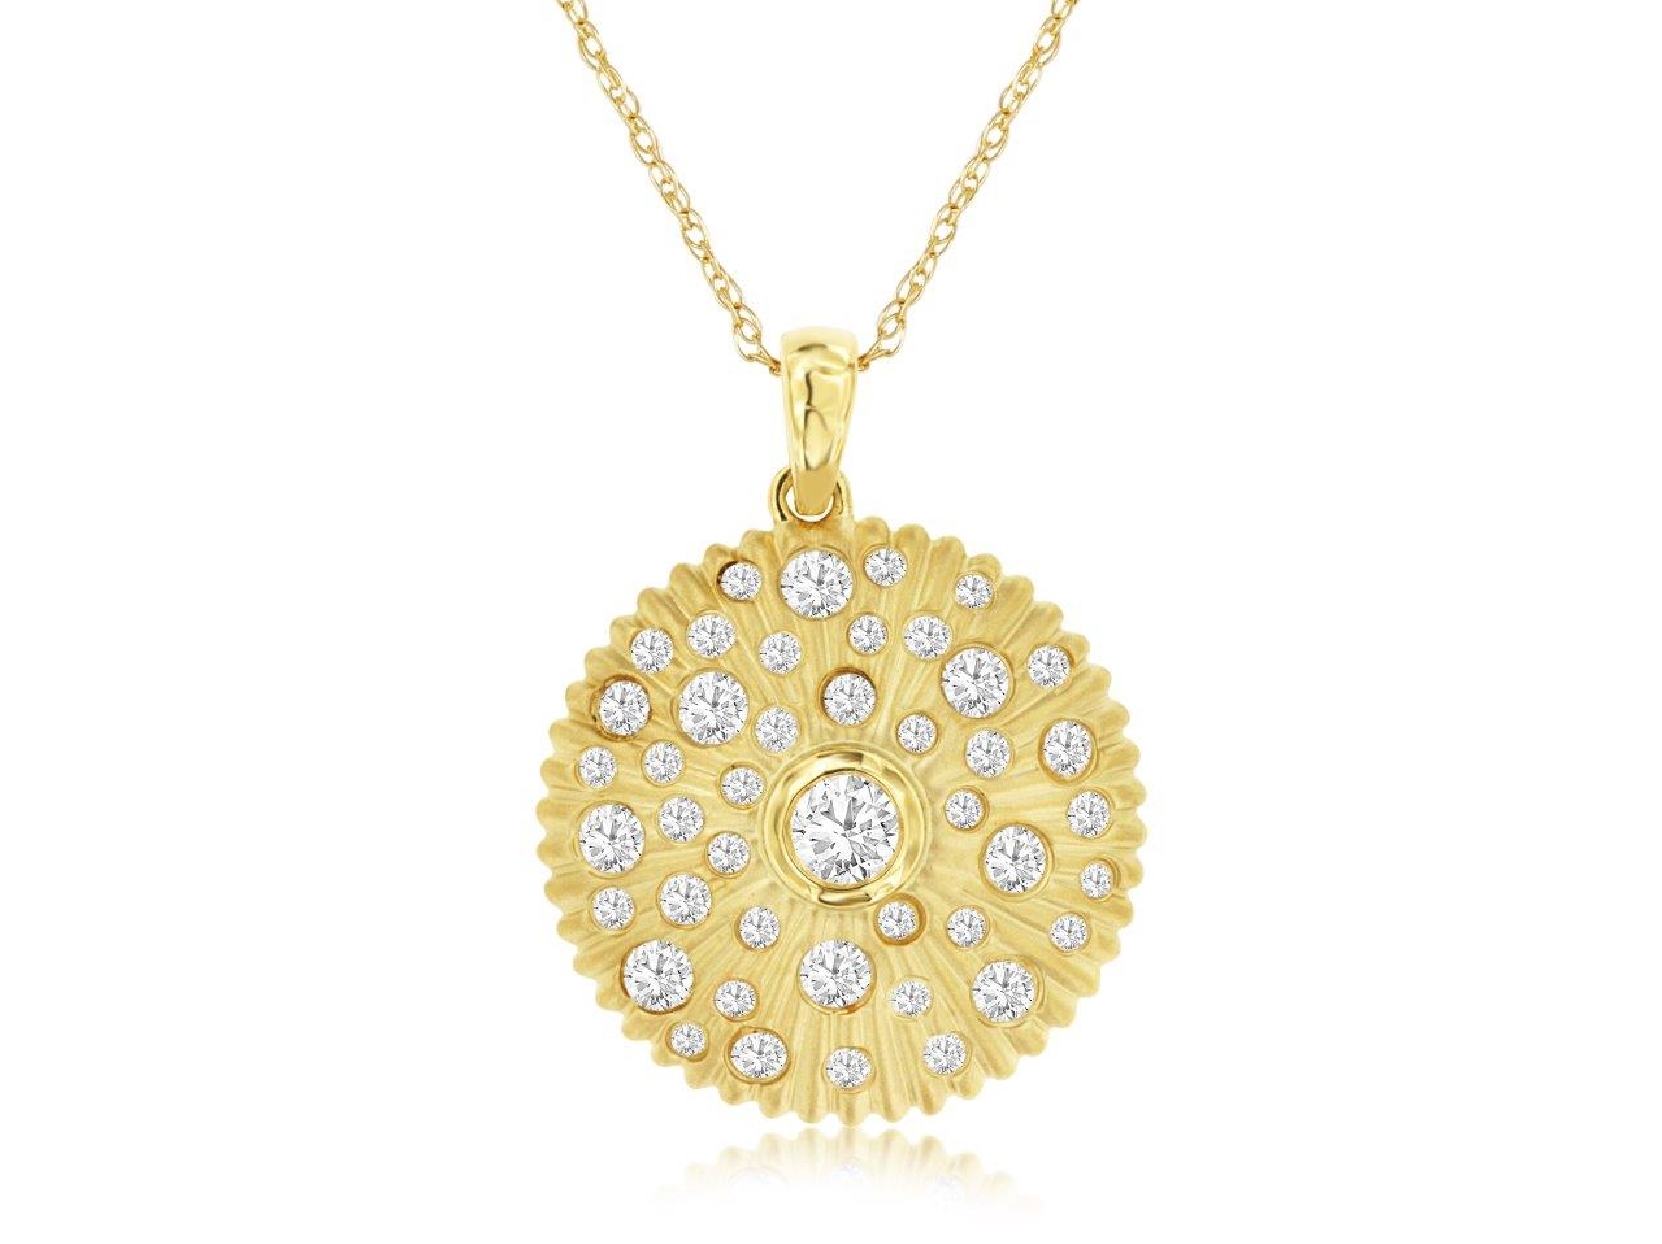 14K Yellow Gold Textured Disc Pendant with Inlaid Diamonds
0.55ct

18 Inches 